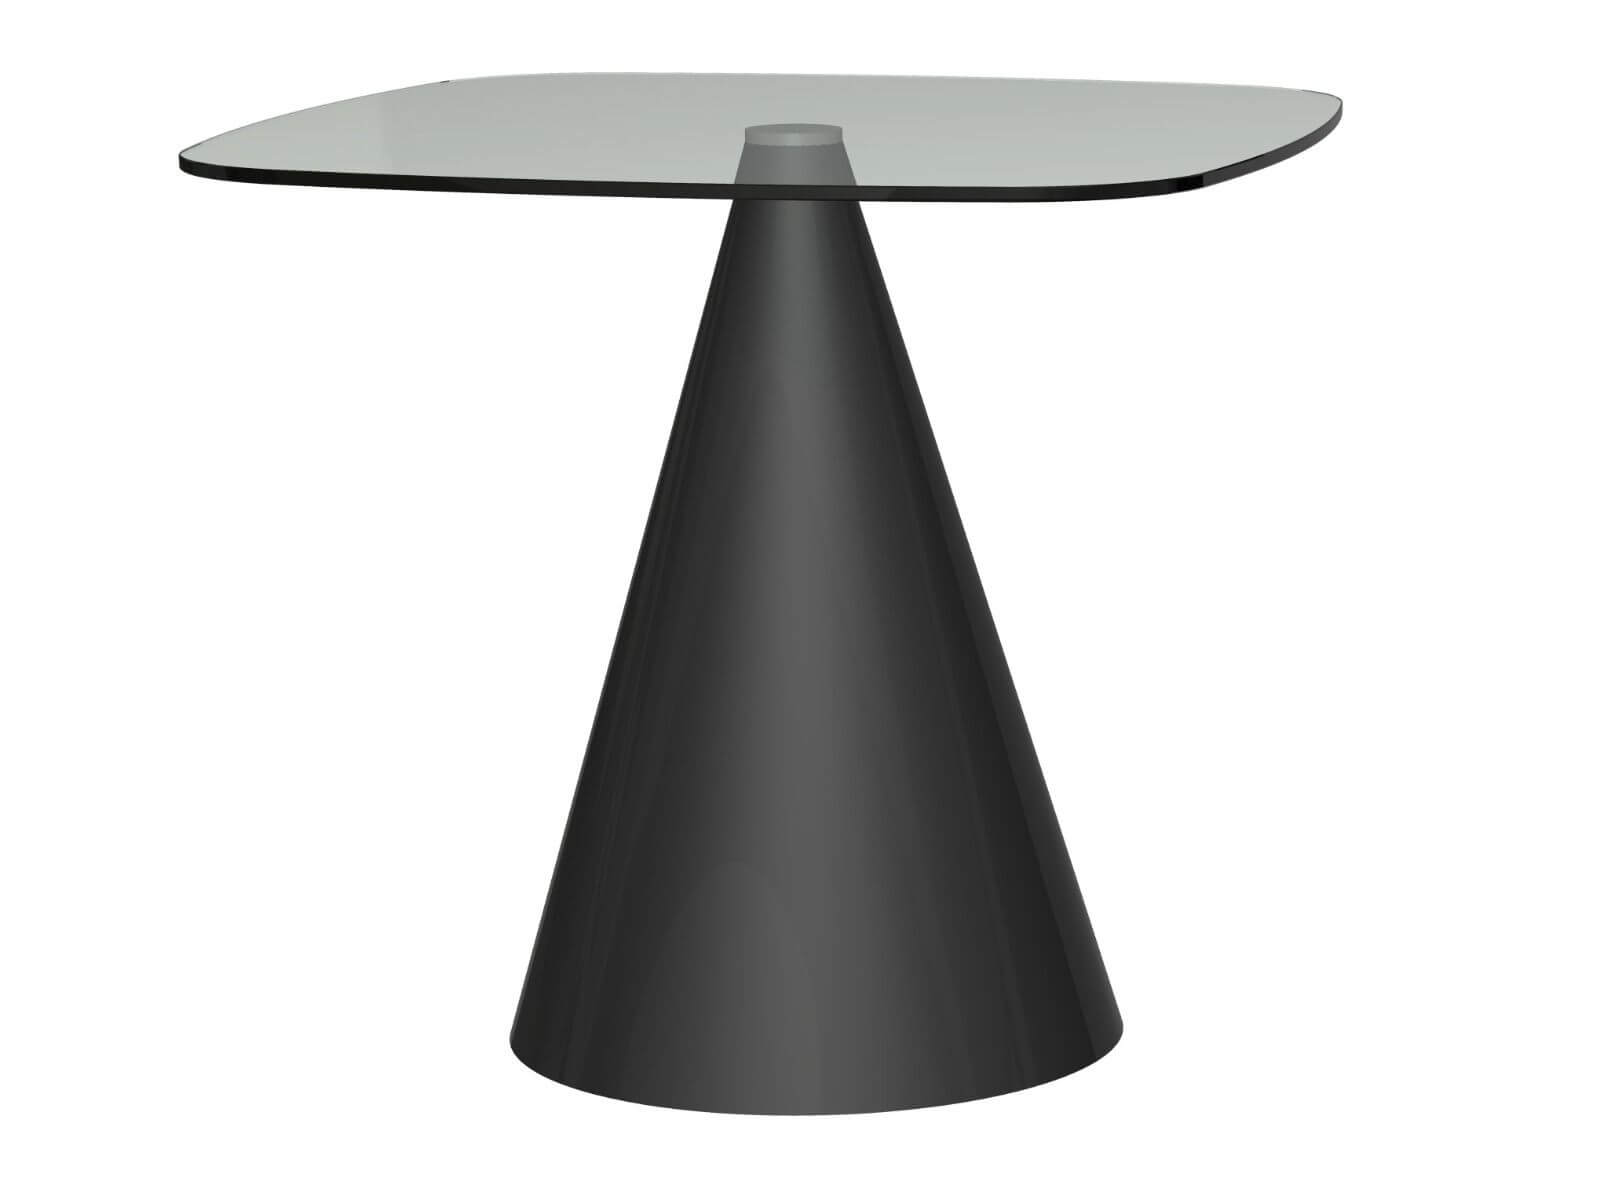 Small square glass table with black base